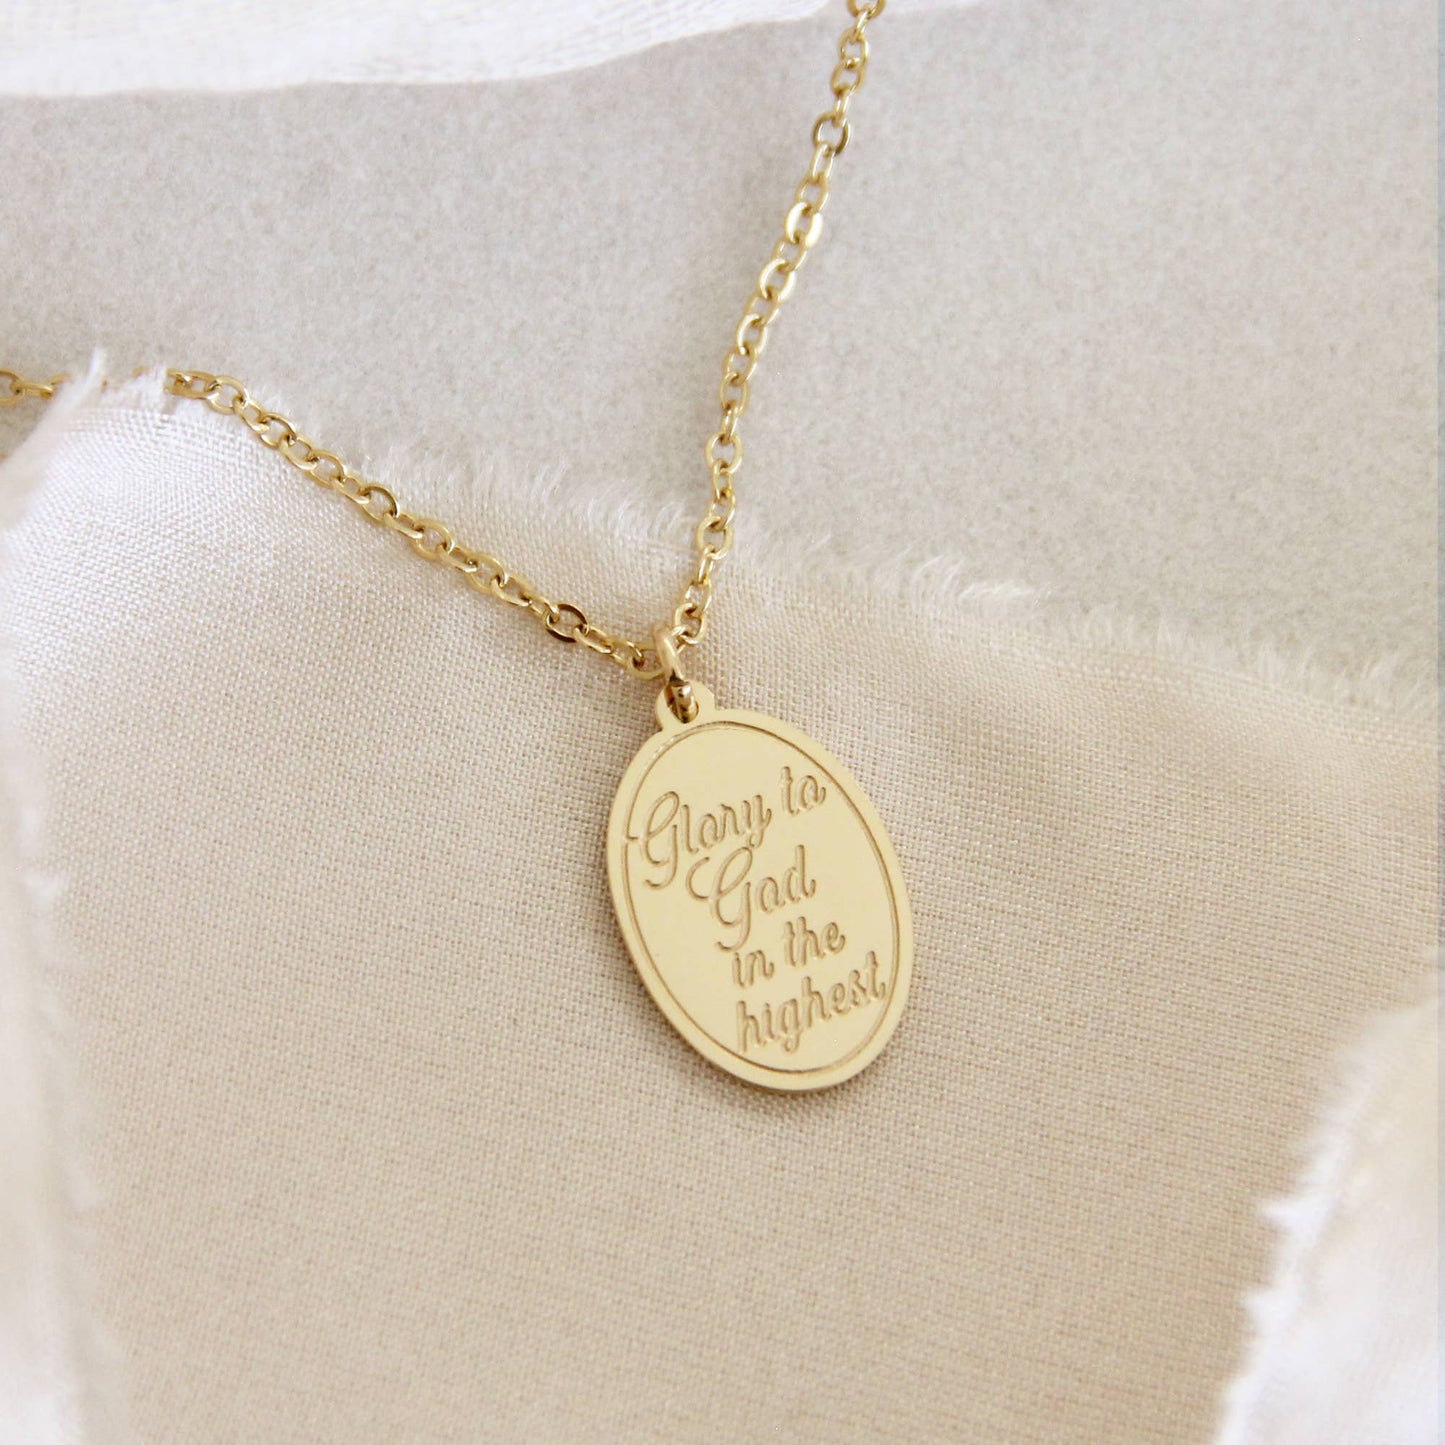 Gloria In Excelsis Deo Necklace, Glory to God in the Highest